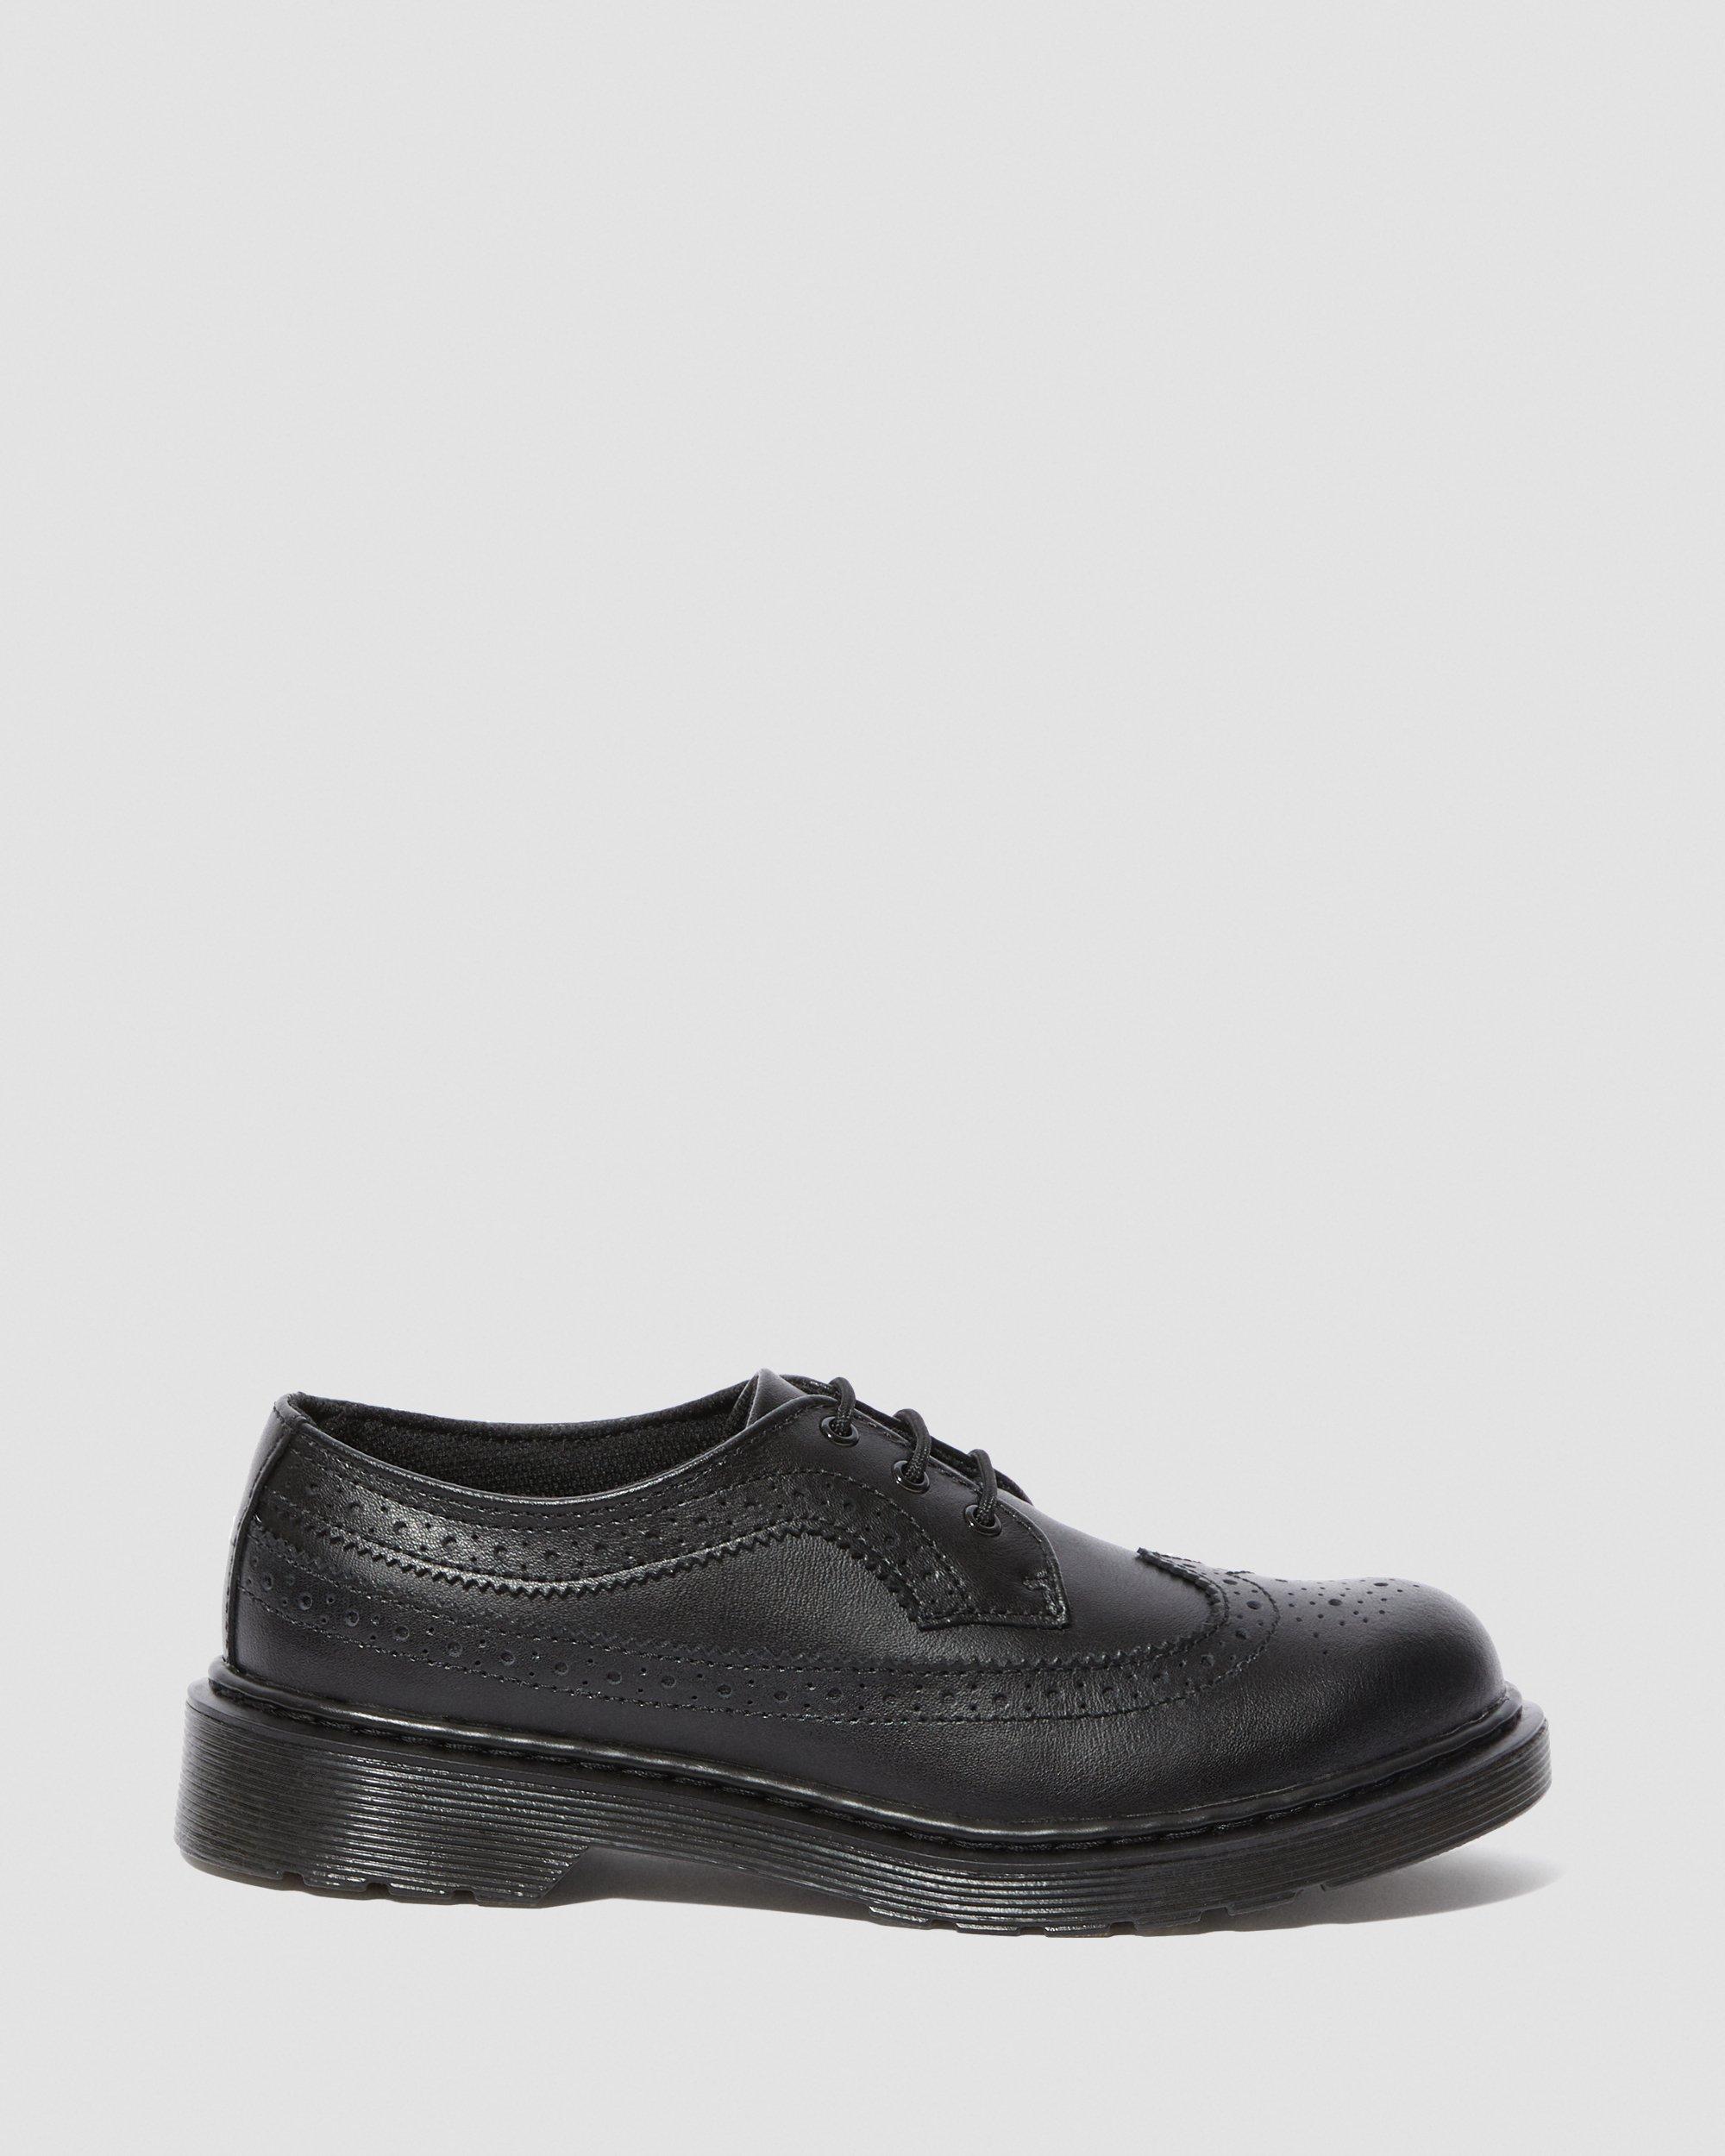 3989 YOUTH LEATHER BROGUE SHOES | Dr. Martens